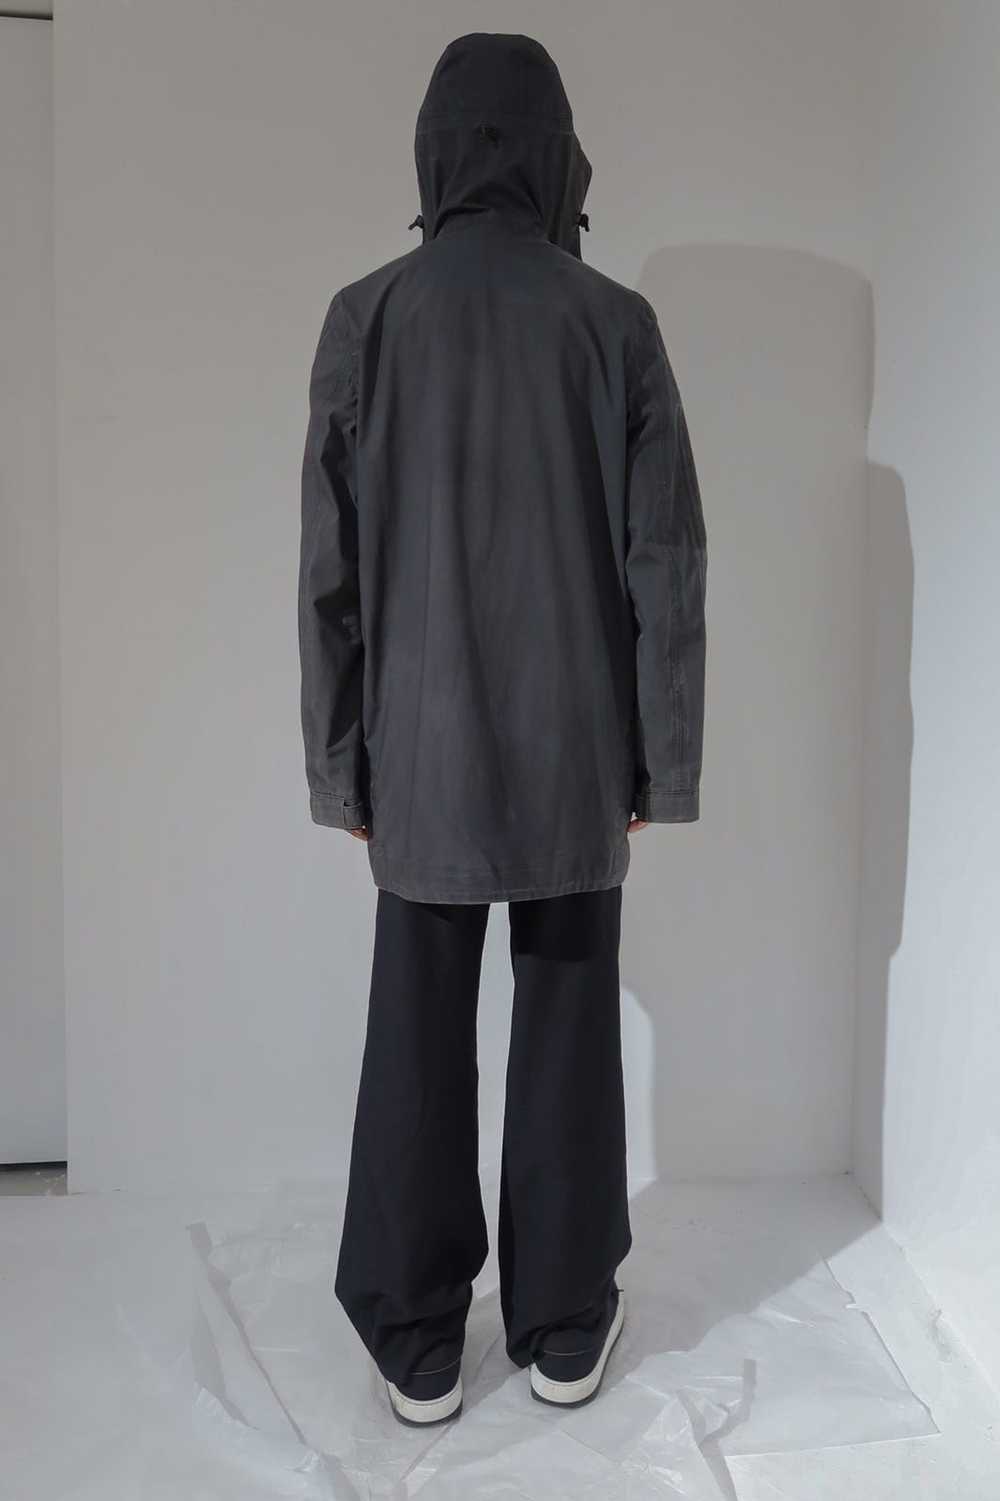 Undercover S/S 2009 Neo Boys “Young Martyr” Goret… - image 3